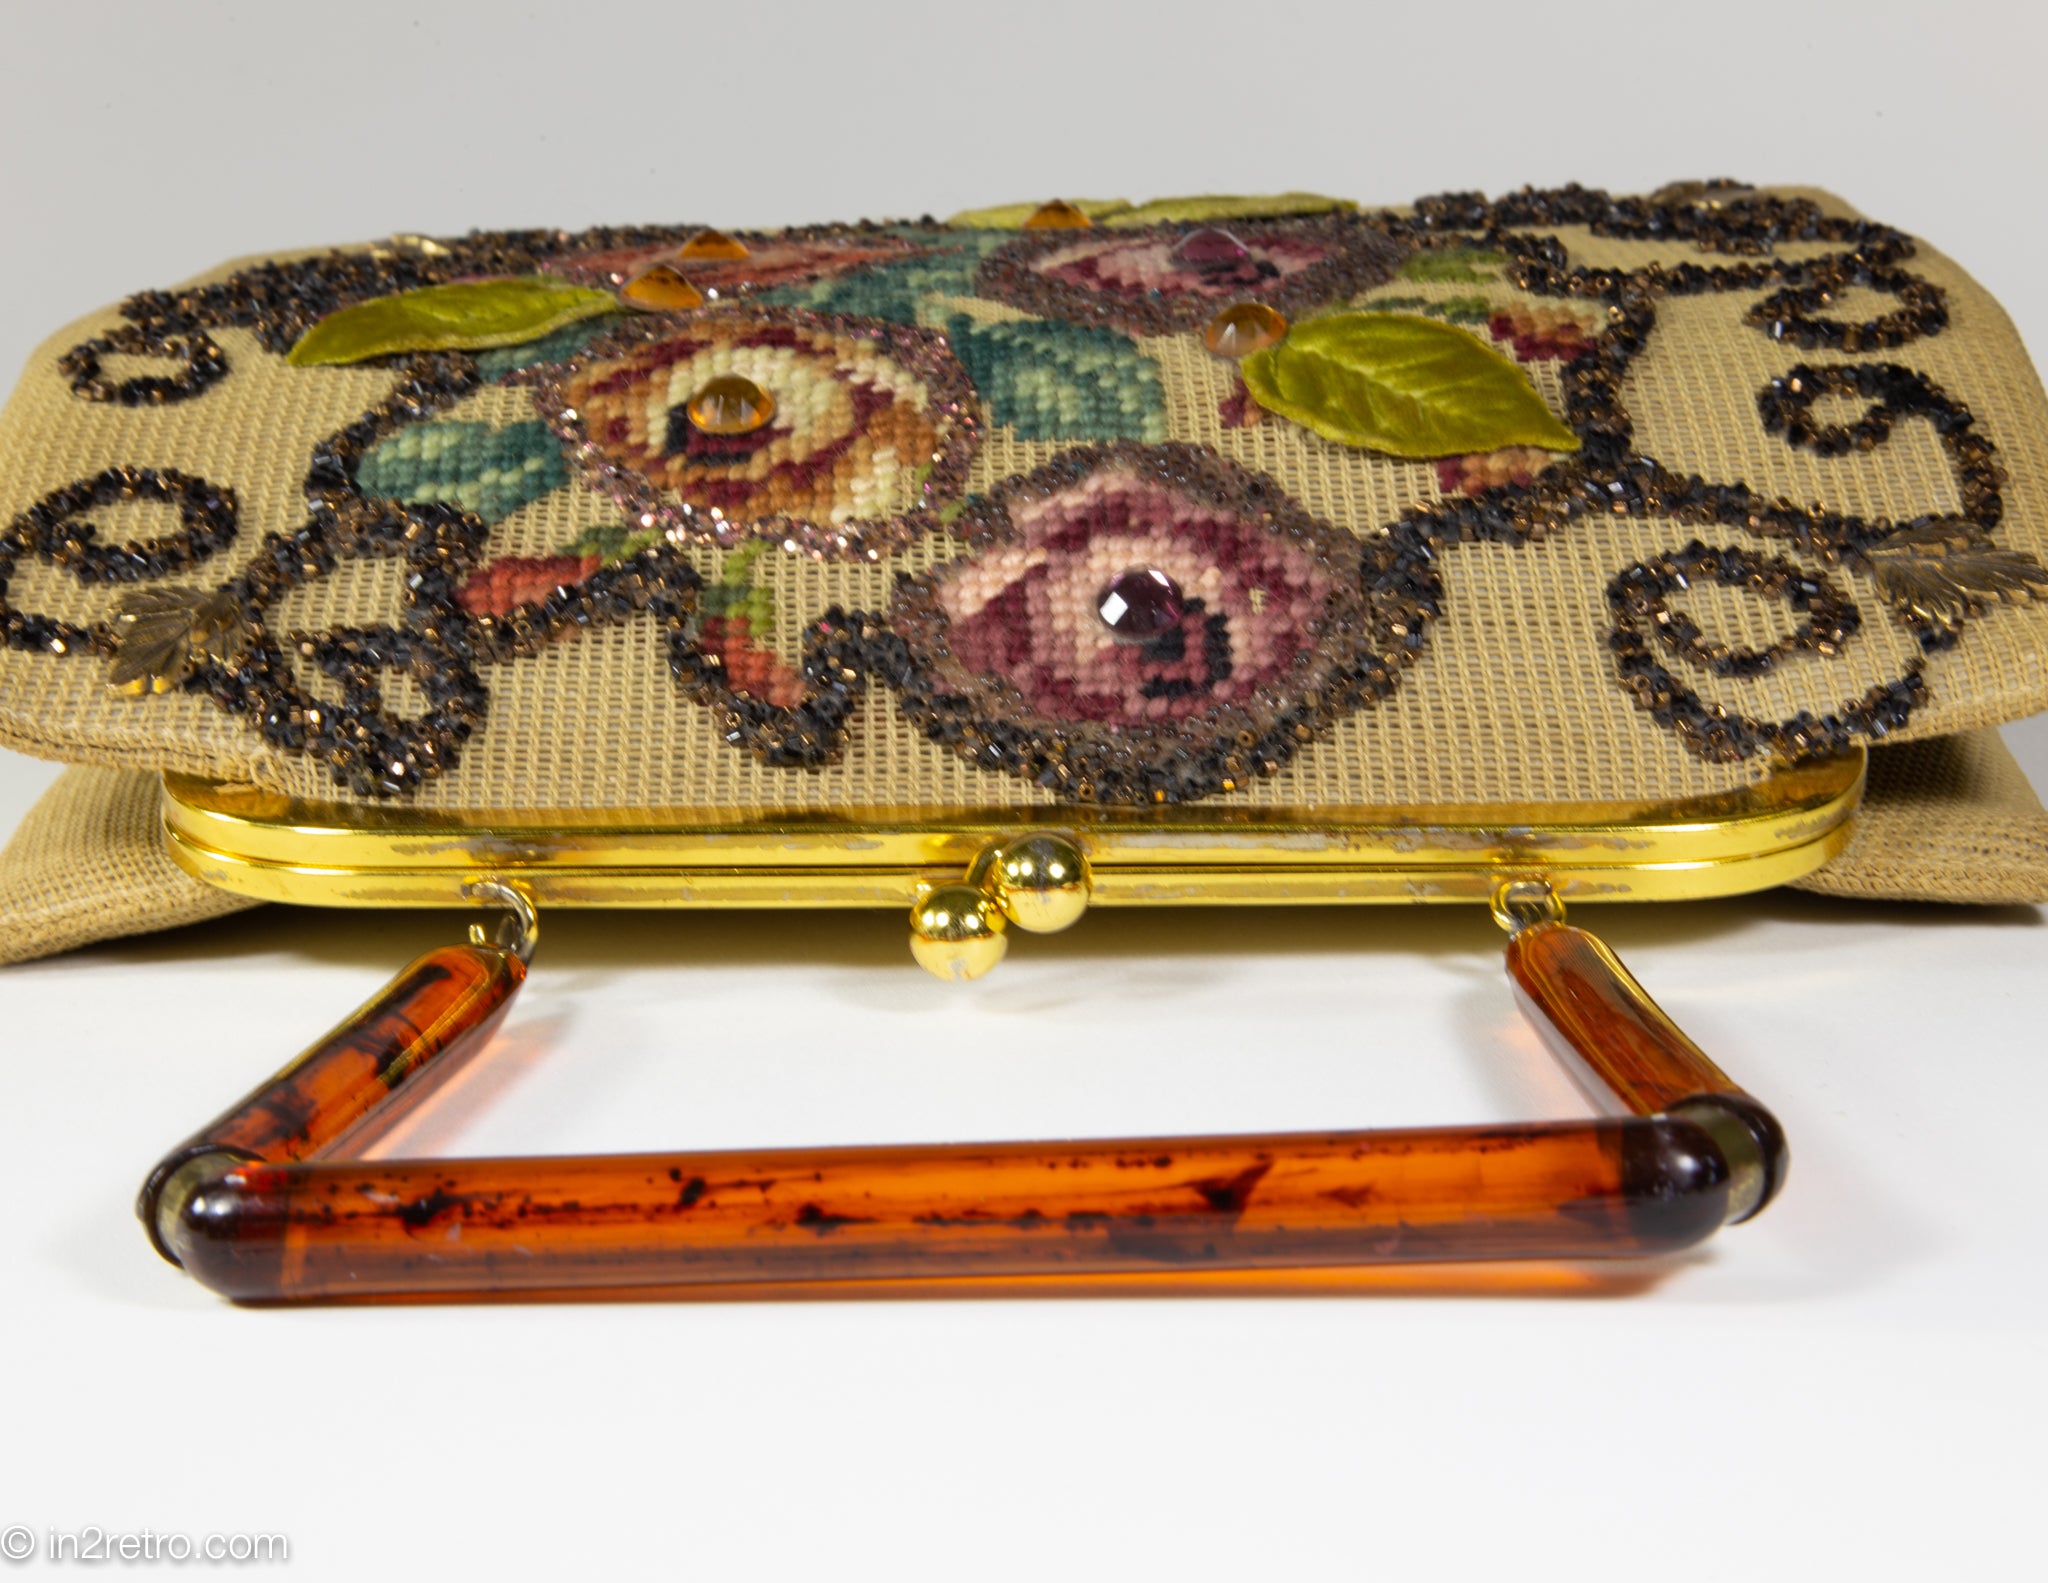 1950s Small Beaded Clutch Bag